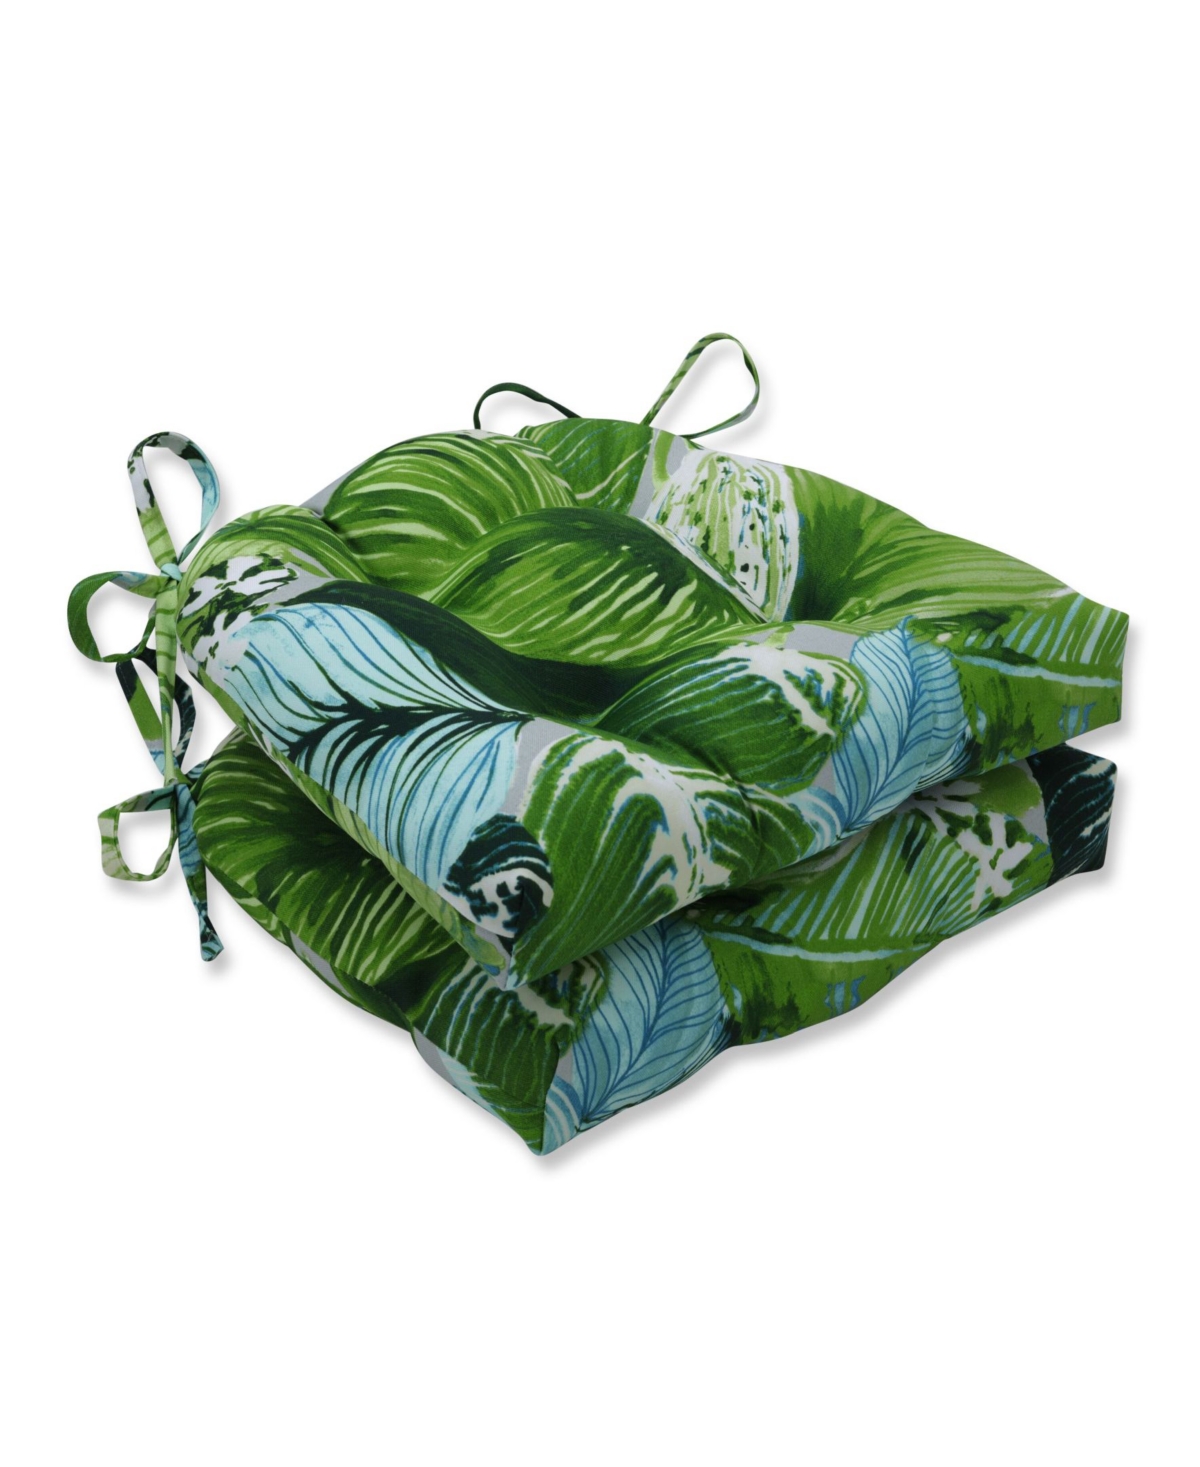 Printed 15" x 16.5" Outdoor Chair Pad Seat Cushions 2-Pack - Floral Multi